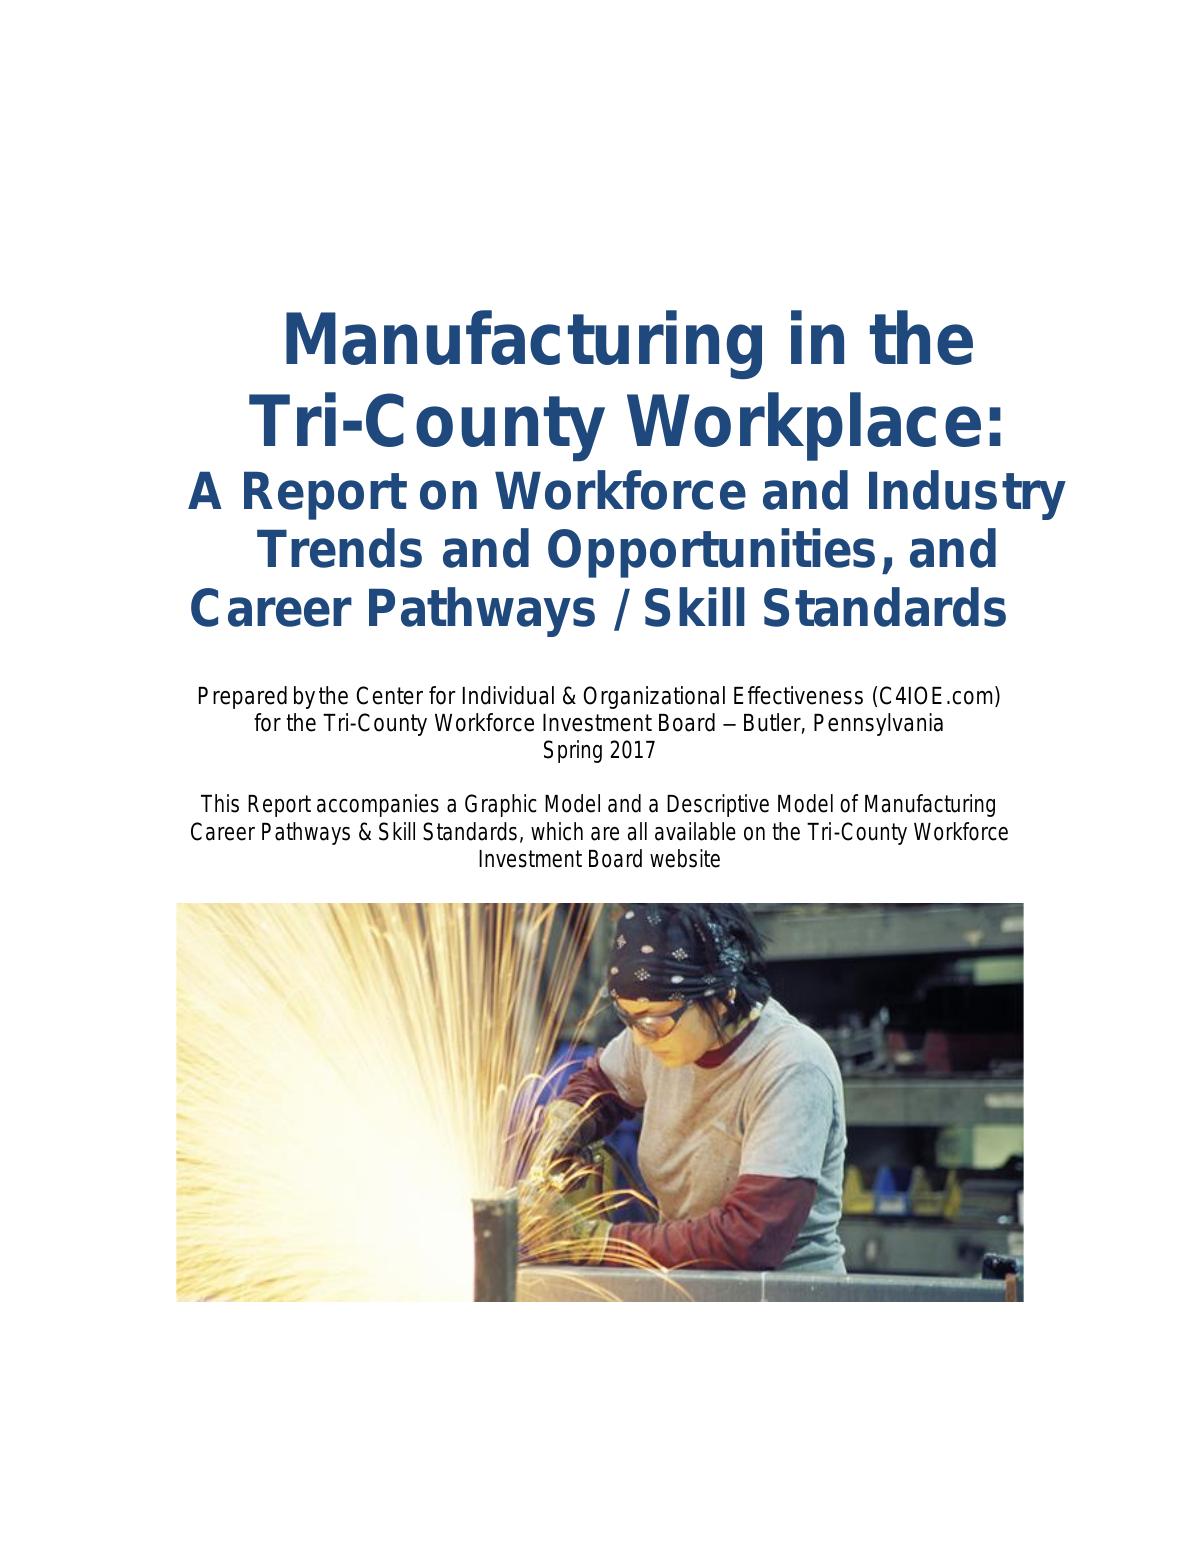 Manufacturing in the Tri-County Workplace: Workforce and Industry Trends and Opportunities